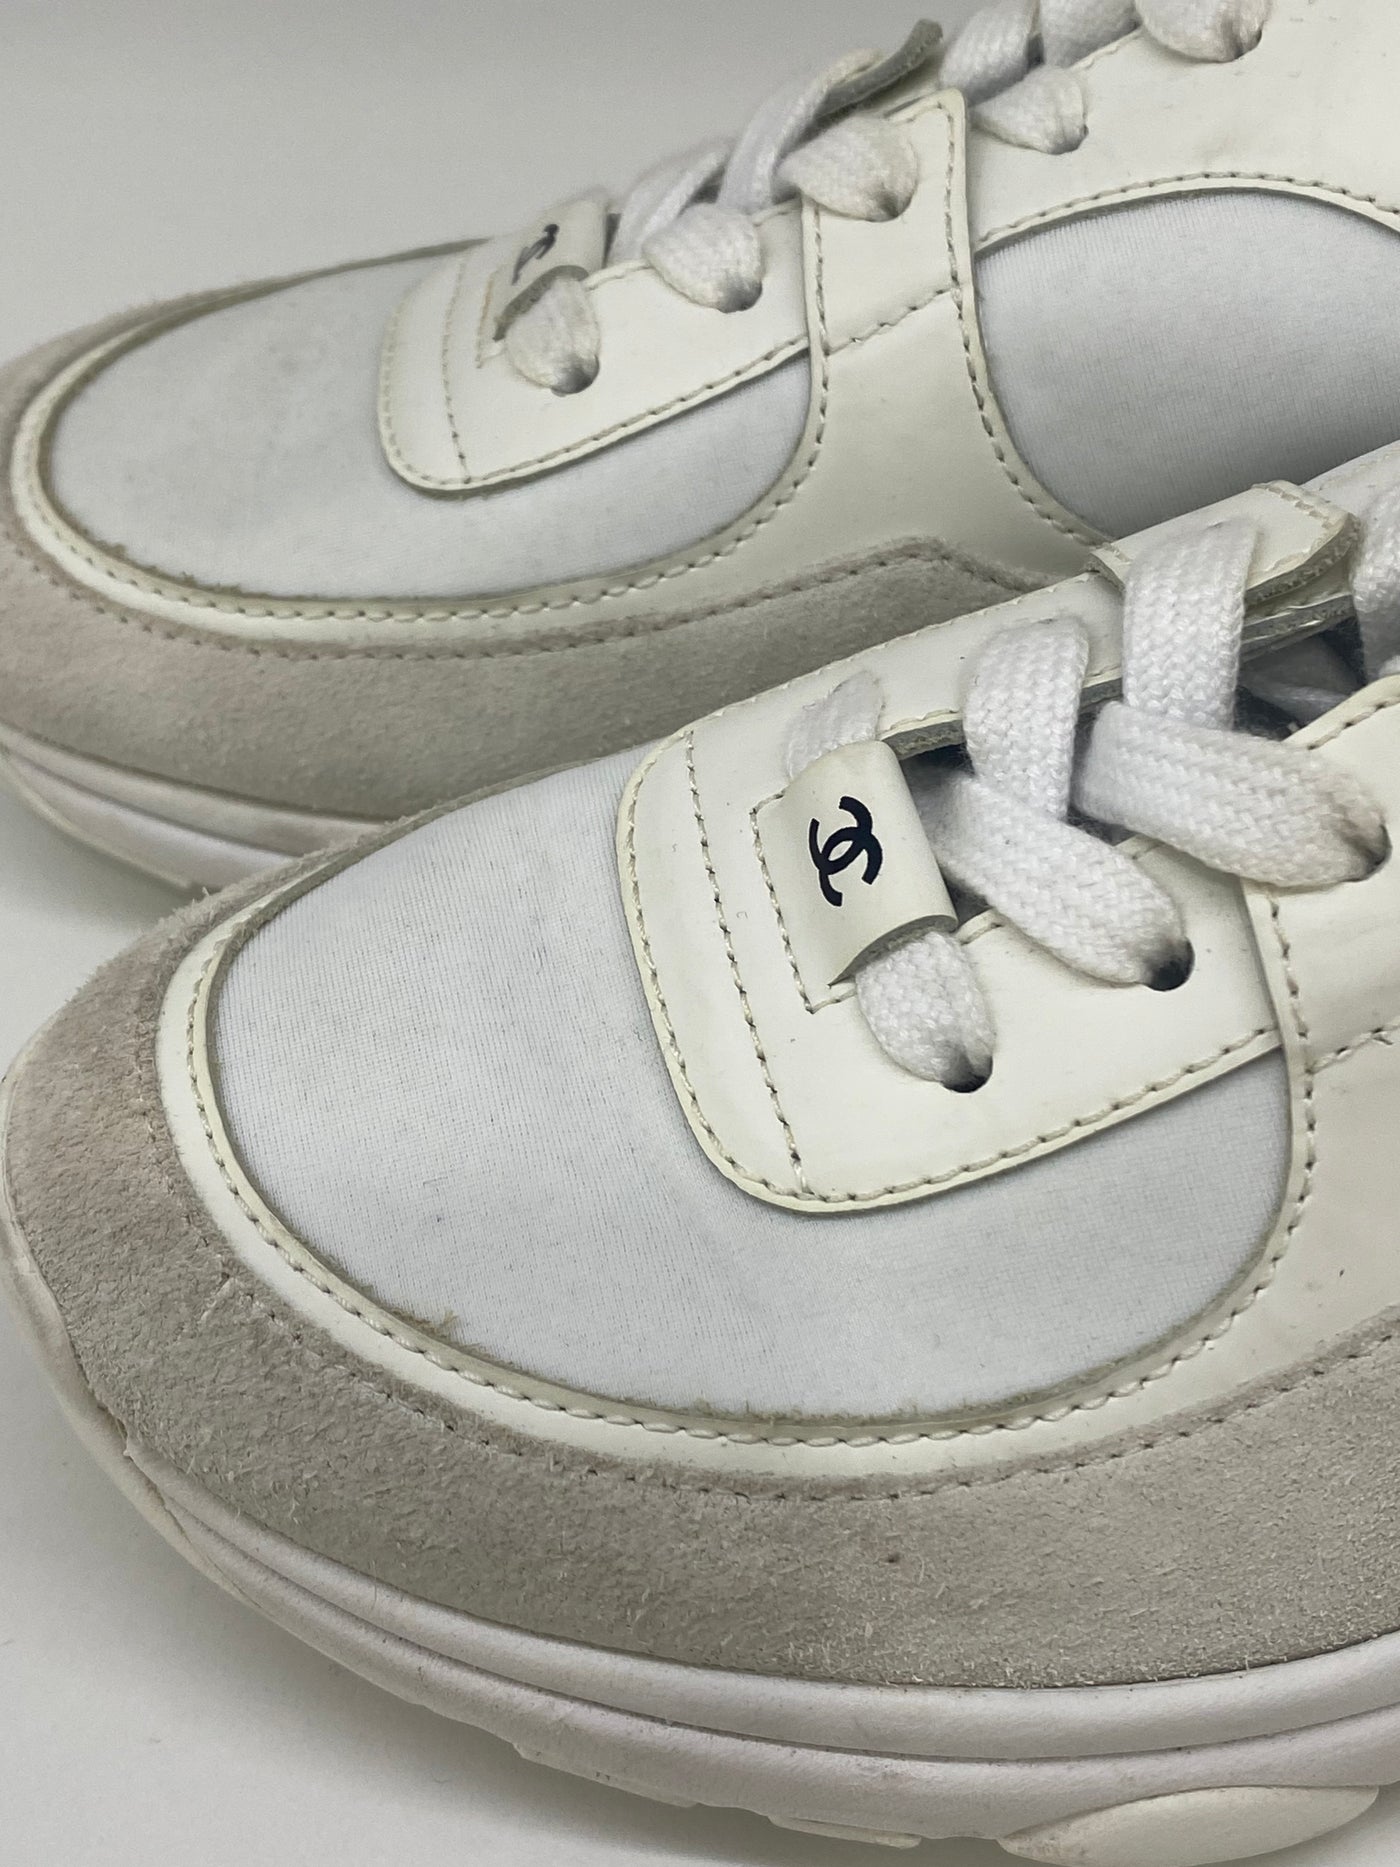 Chanel White Sneakers Size 36